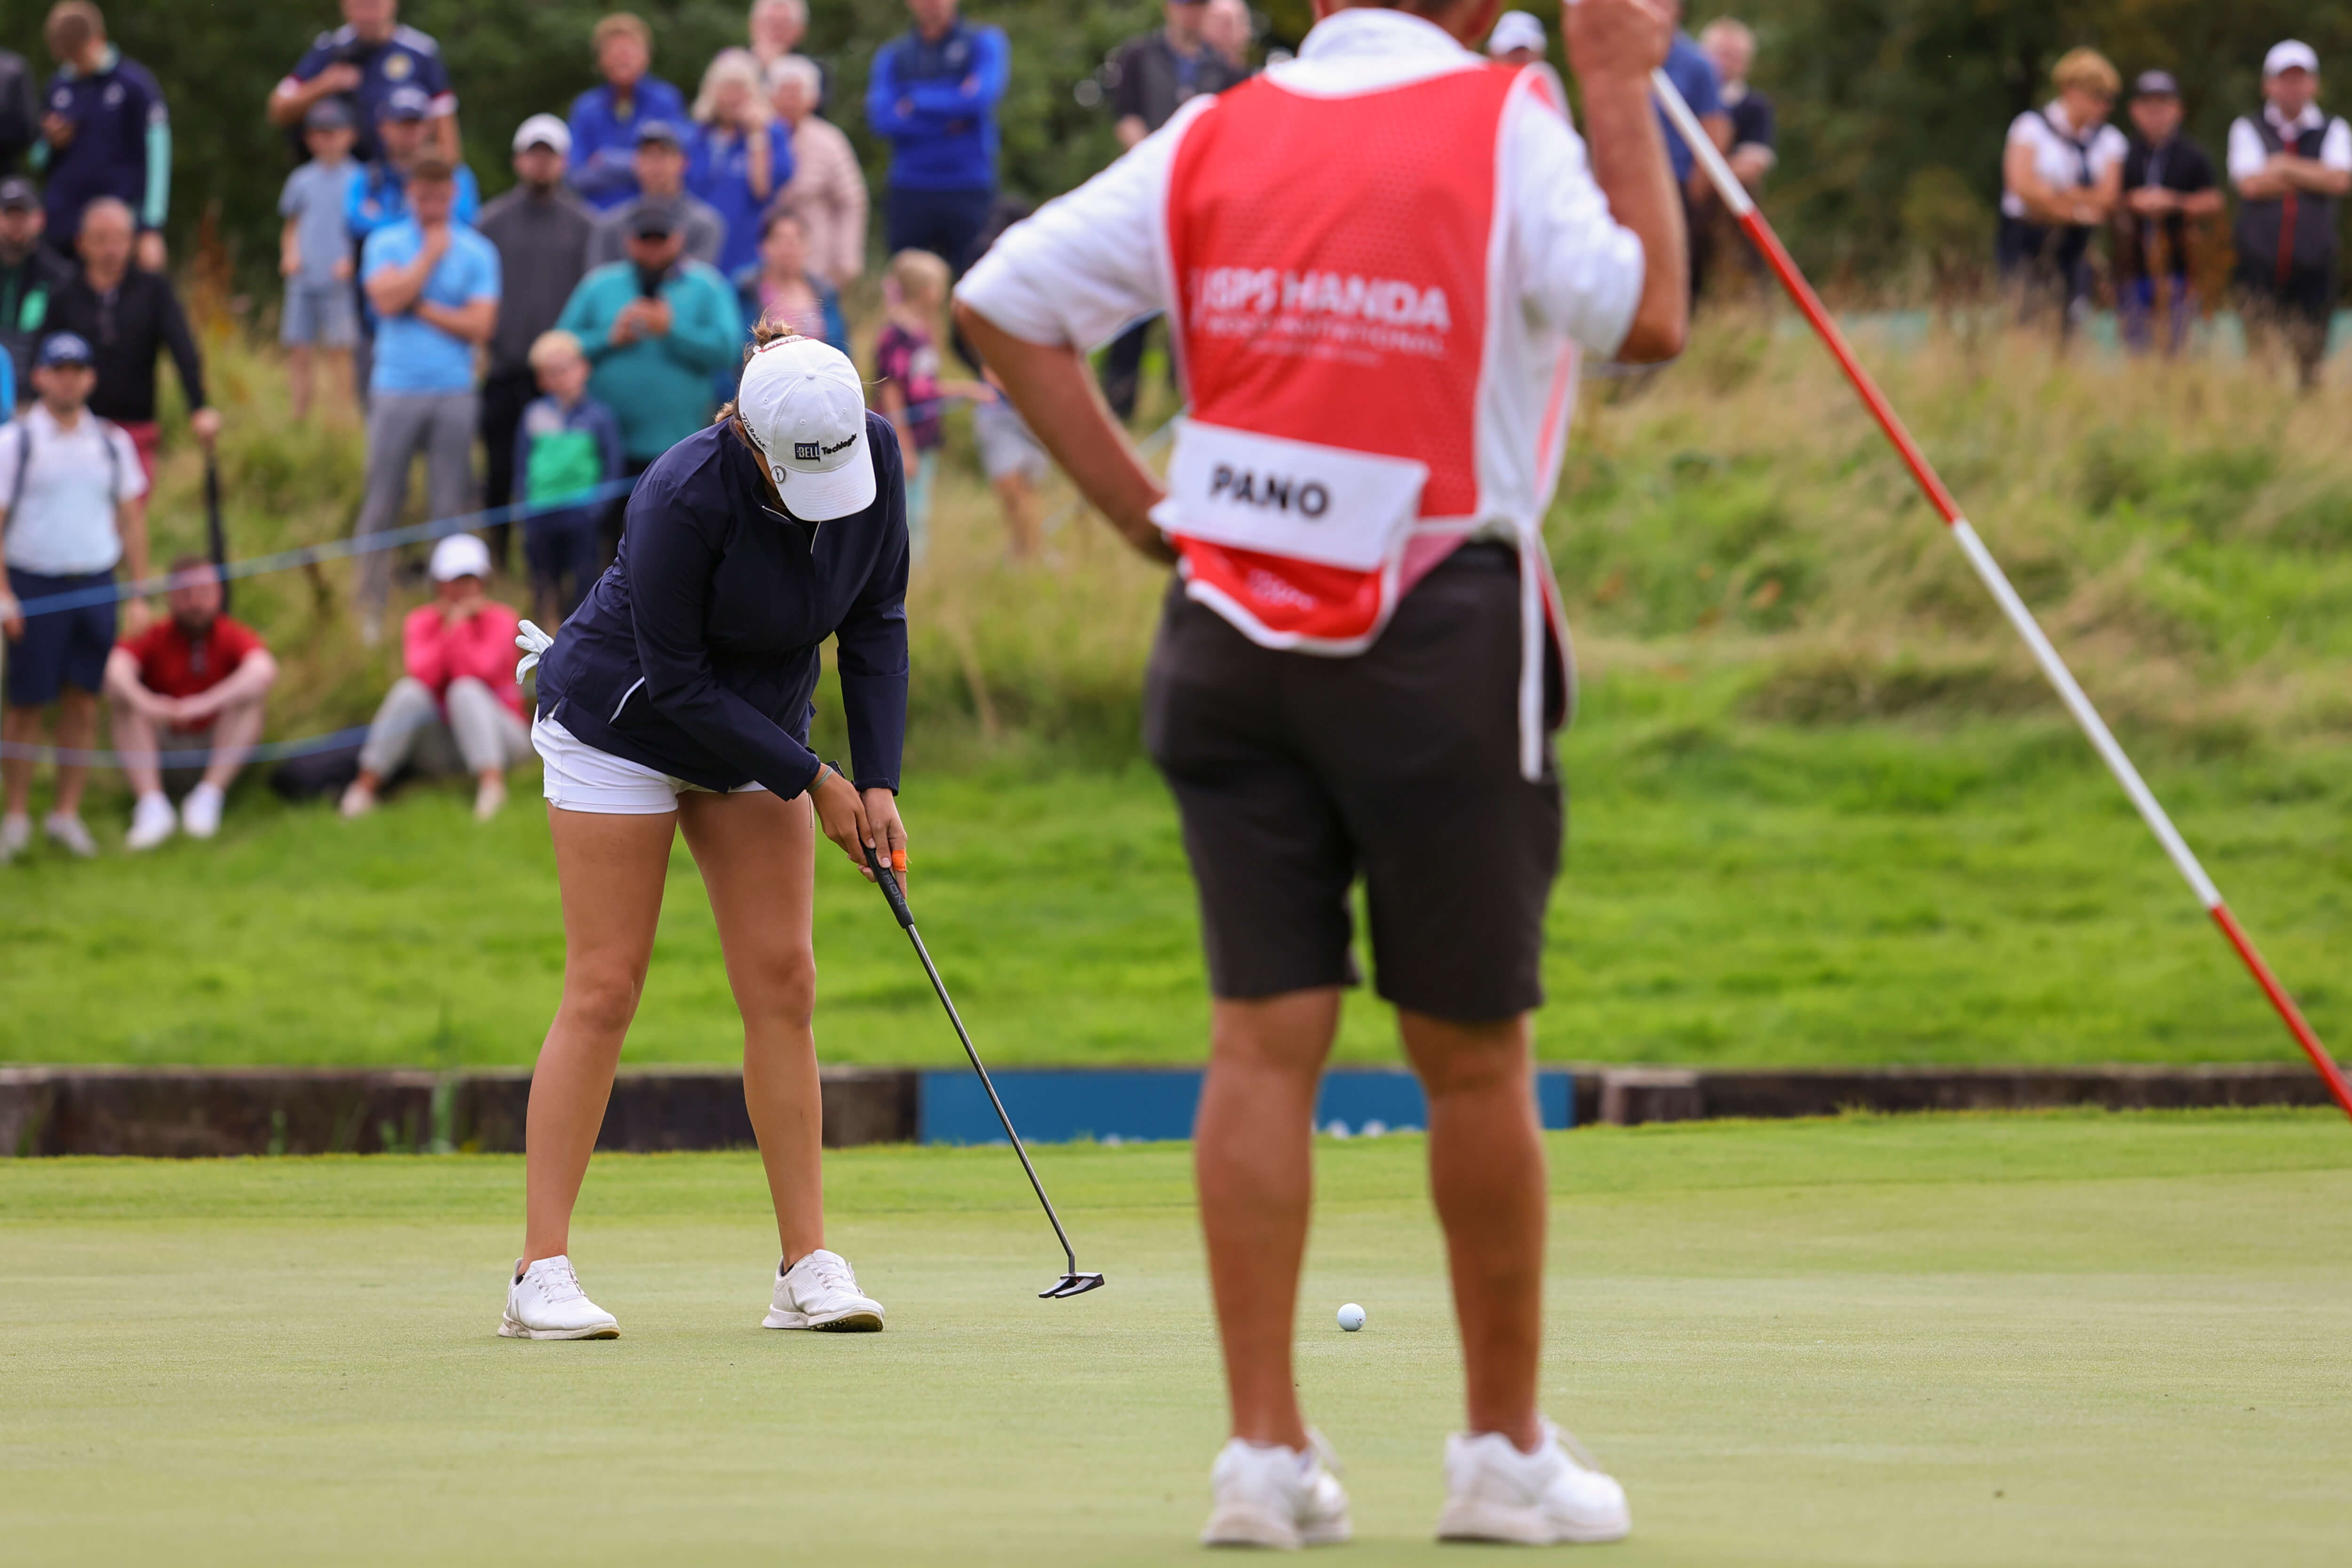 Showing her mettle, Pano executed an impressive approach shot, enabling her to secure a birdie with just two putts. This birdie proved to be the defining moment of the playoff, securing Pano her first-ever title on both the LPGA Tour and Ladies European Tour.